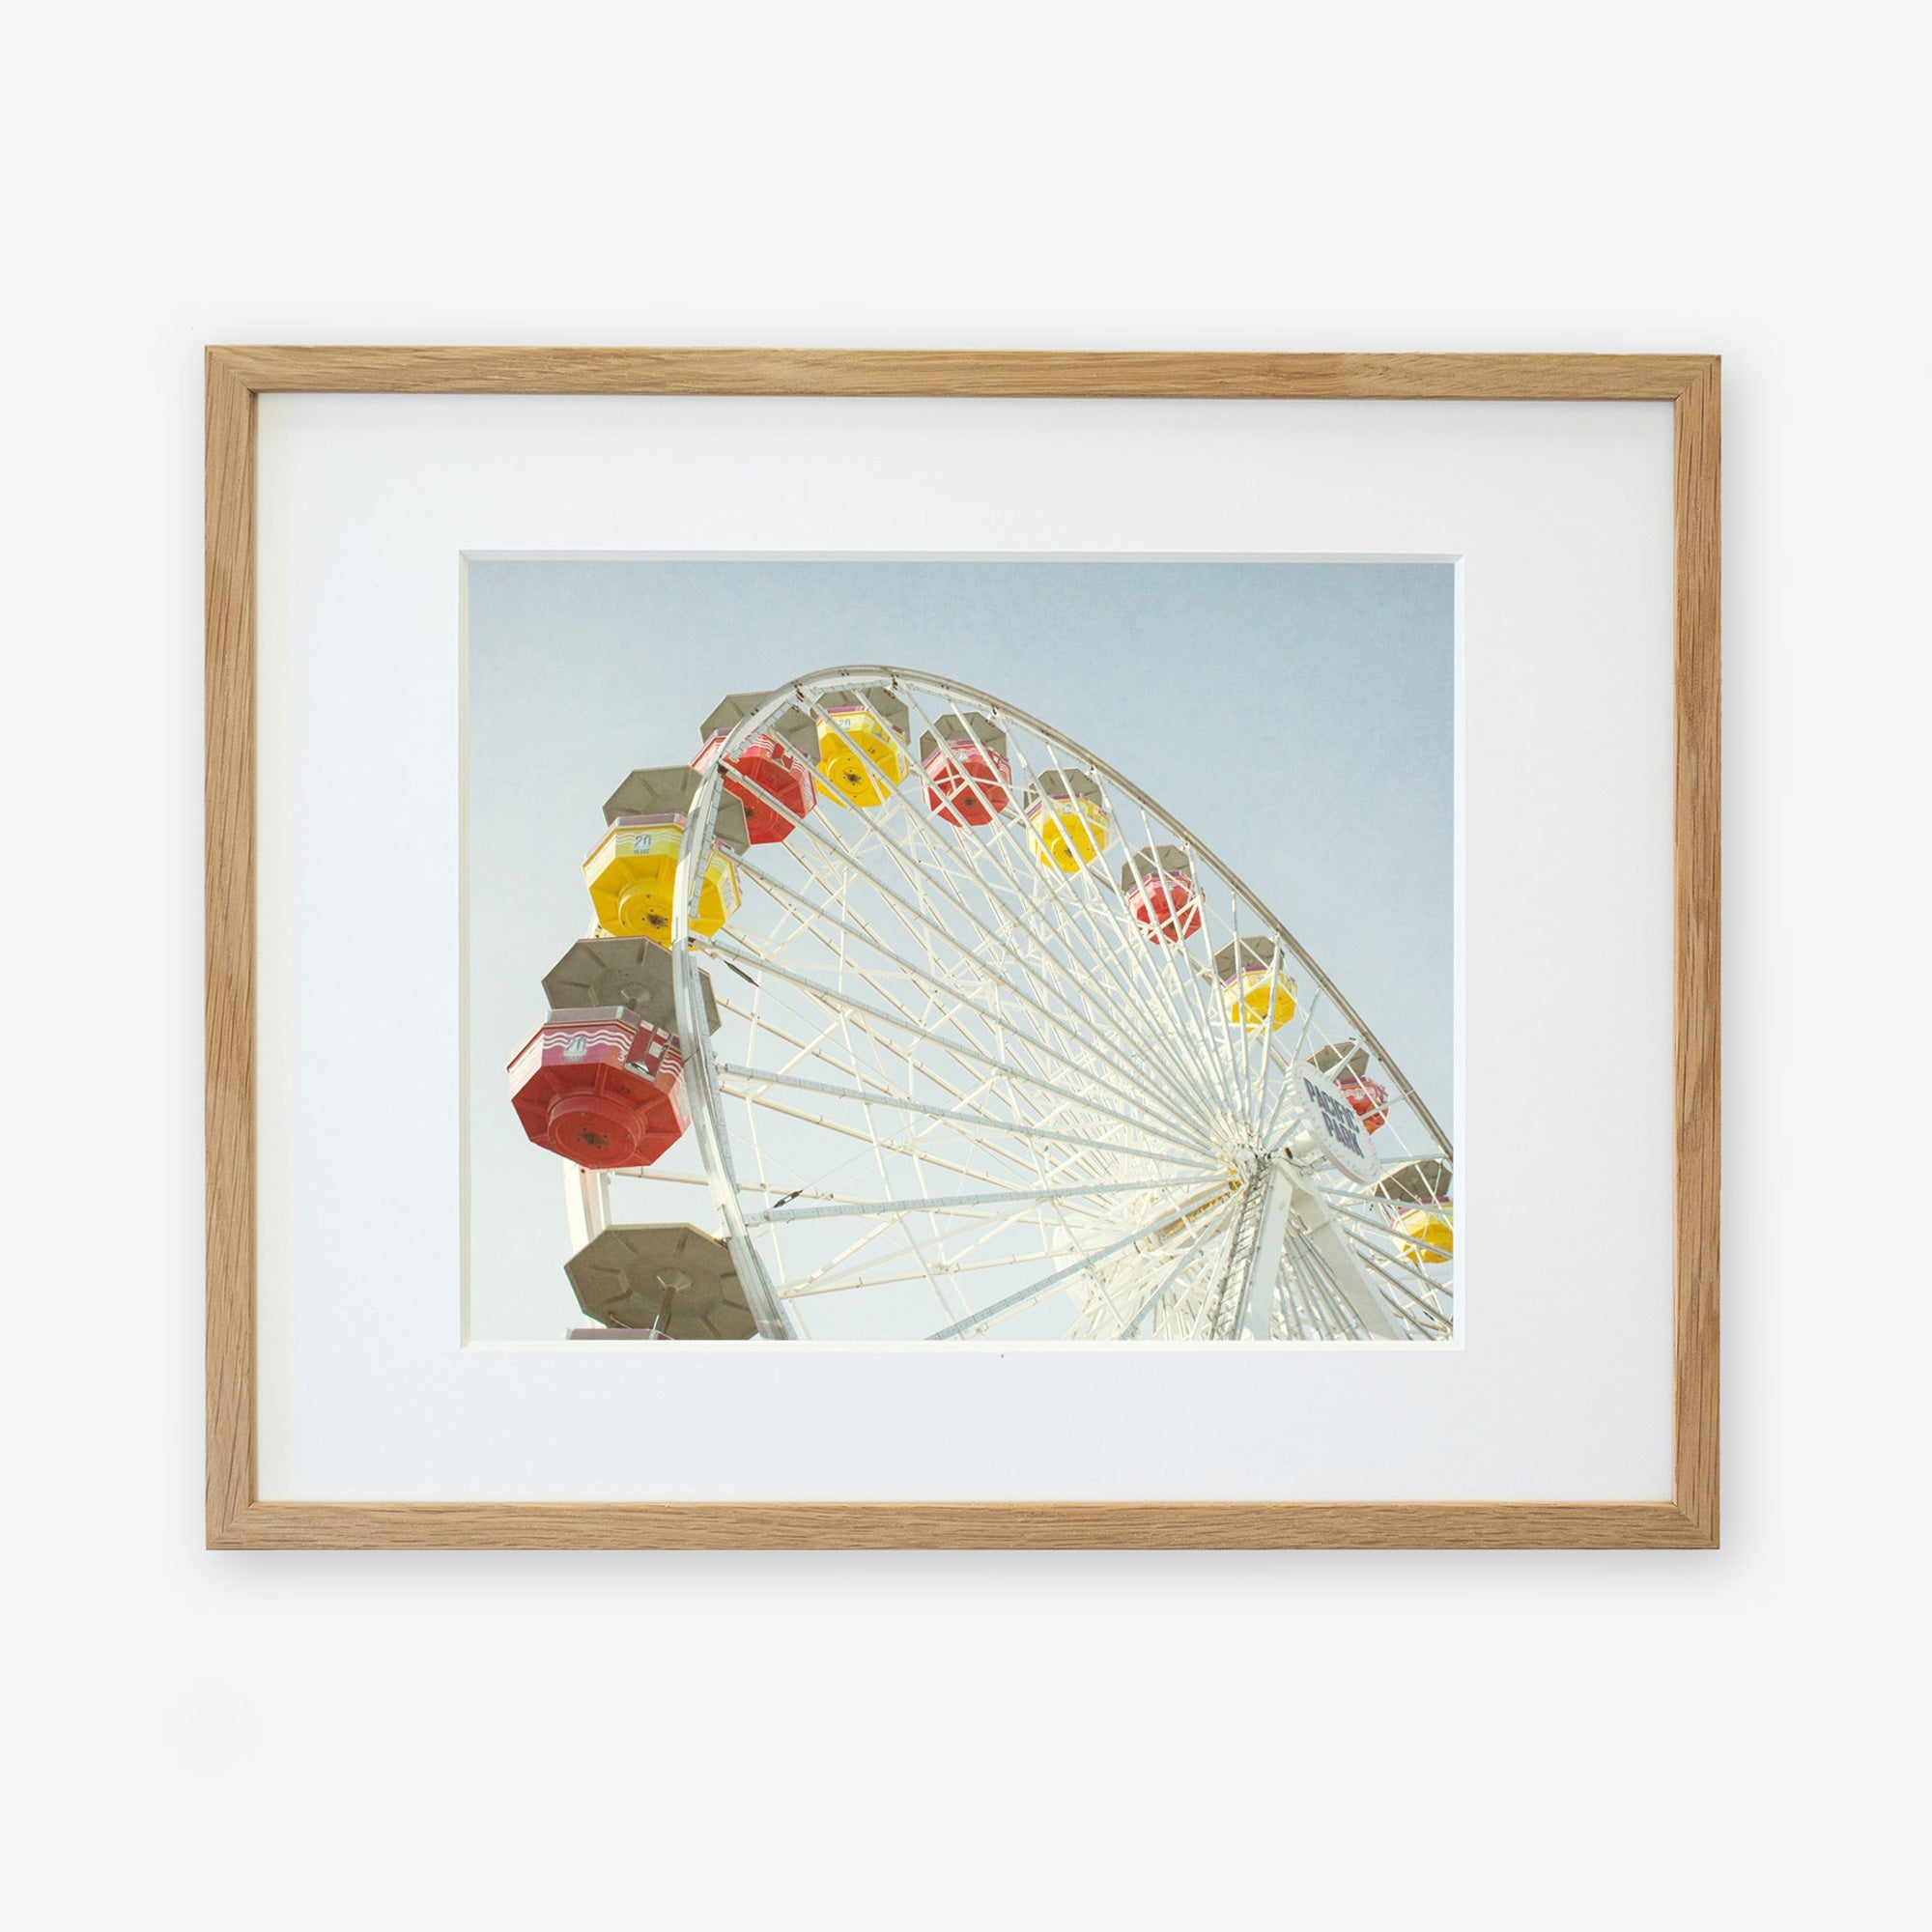 A framed photograph of a colorful Santa Monica Ferris Wheel Print, &#39;Ferris Above&#39;, at Santa Monica Pier, set against a clear sky, viewed from below. The frame is wooden and simple, emphasizing the vivid colors of the ride by Offley Green.